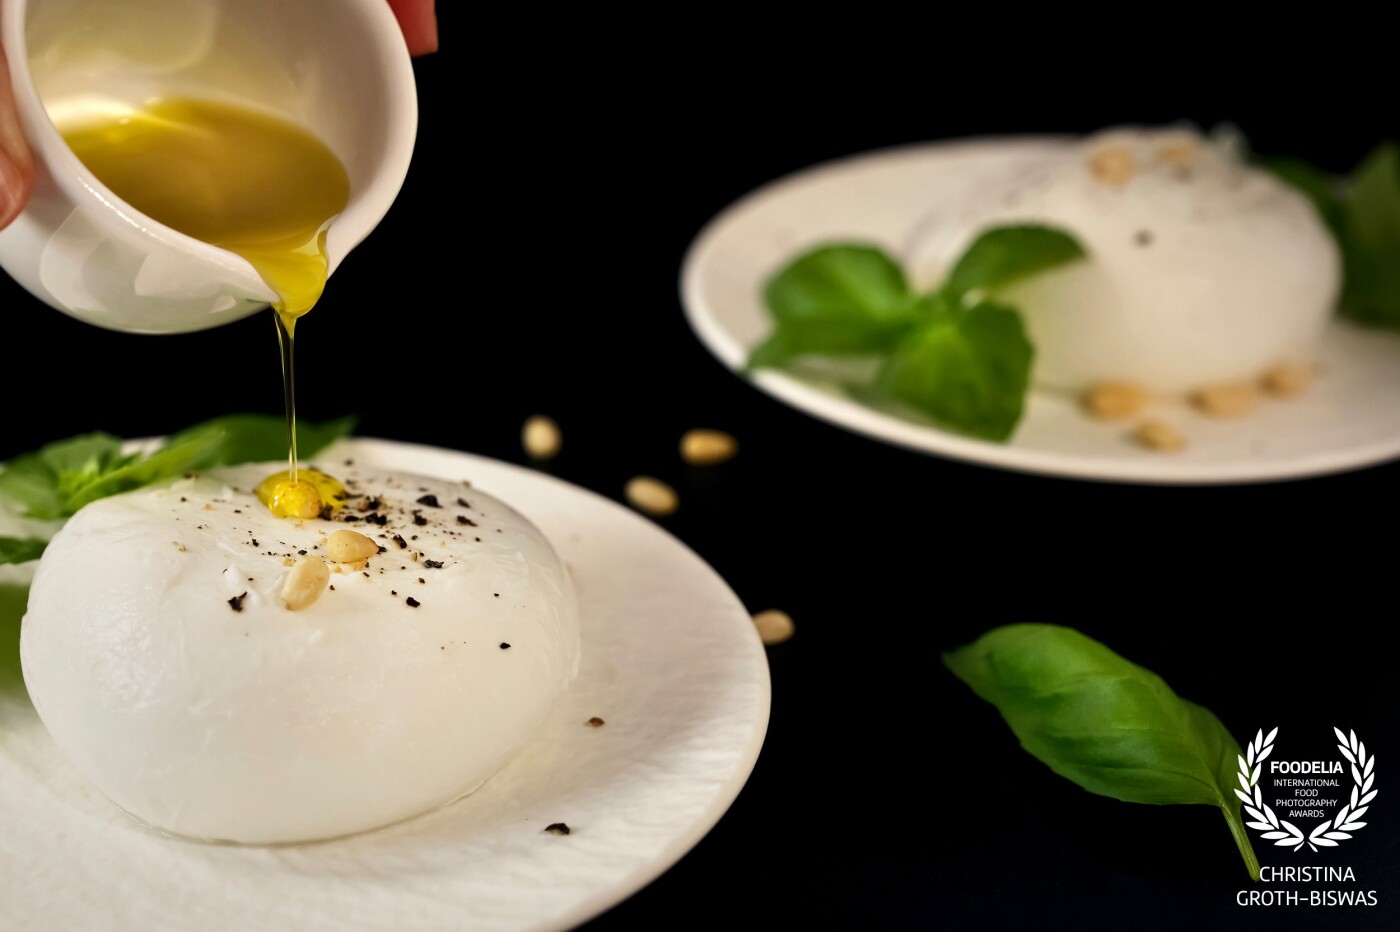 Olive oil and mozzarella cheese, this is a beautiful combination. Add some basil leaves to add additional flavour - and colour to the picture - and you have a perfect quick lunch.